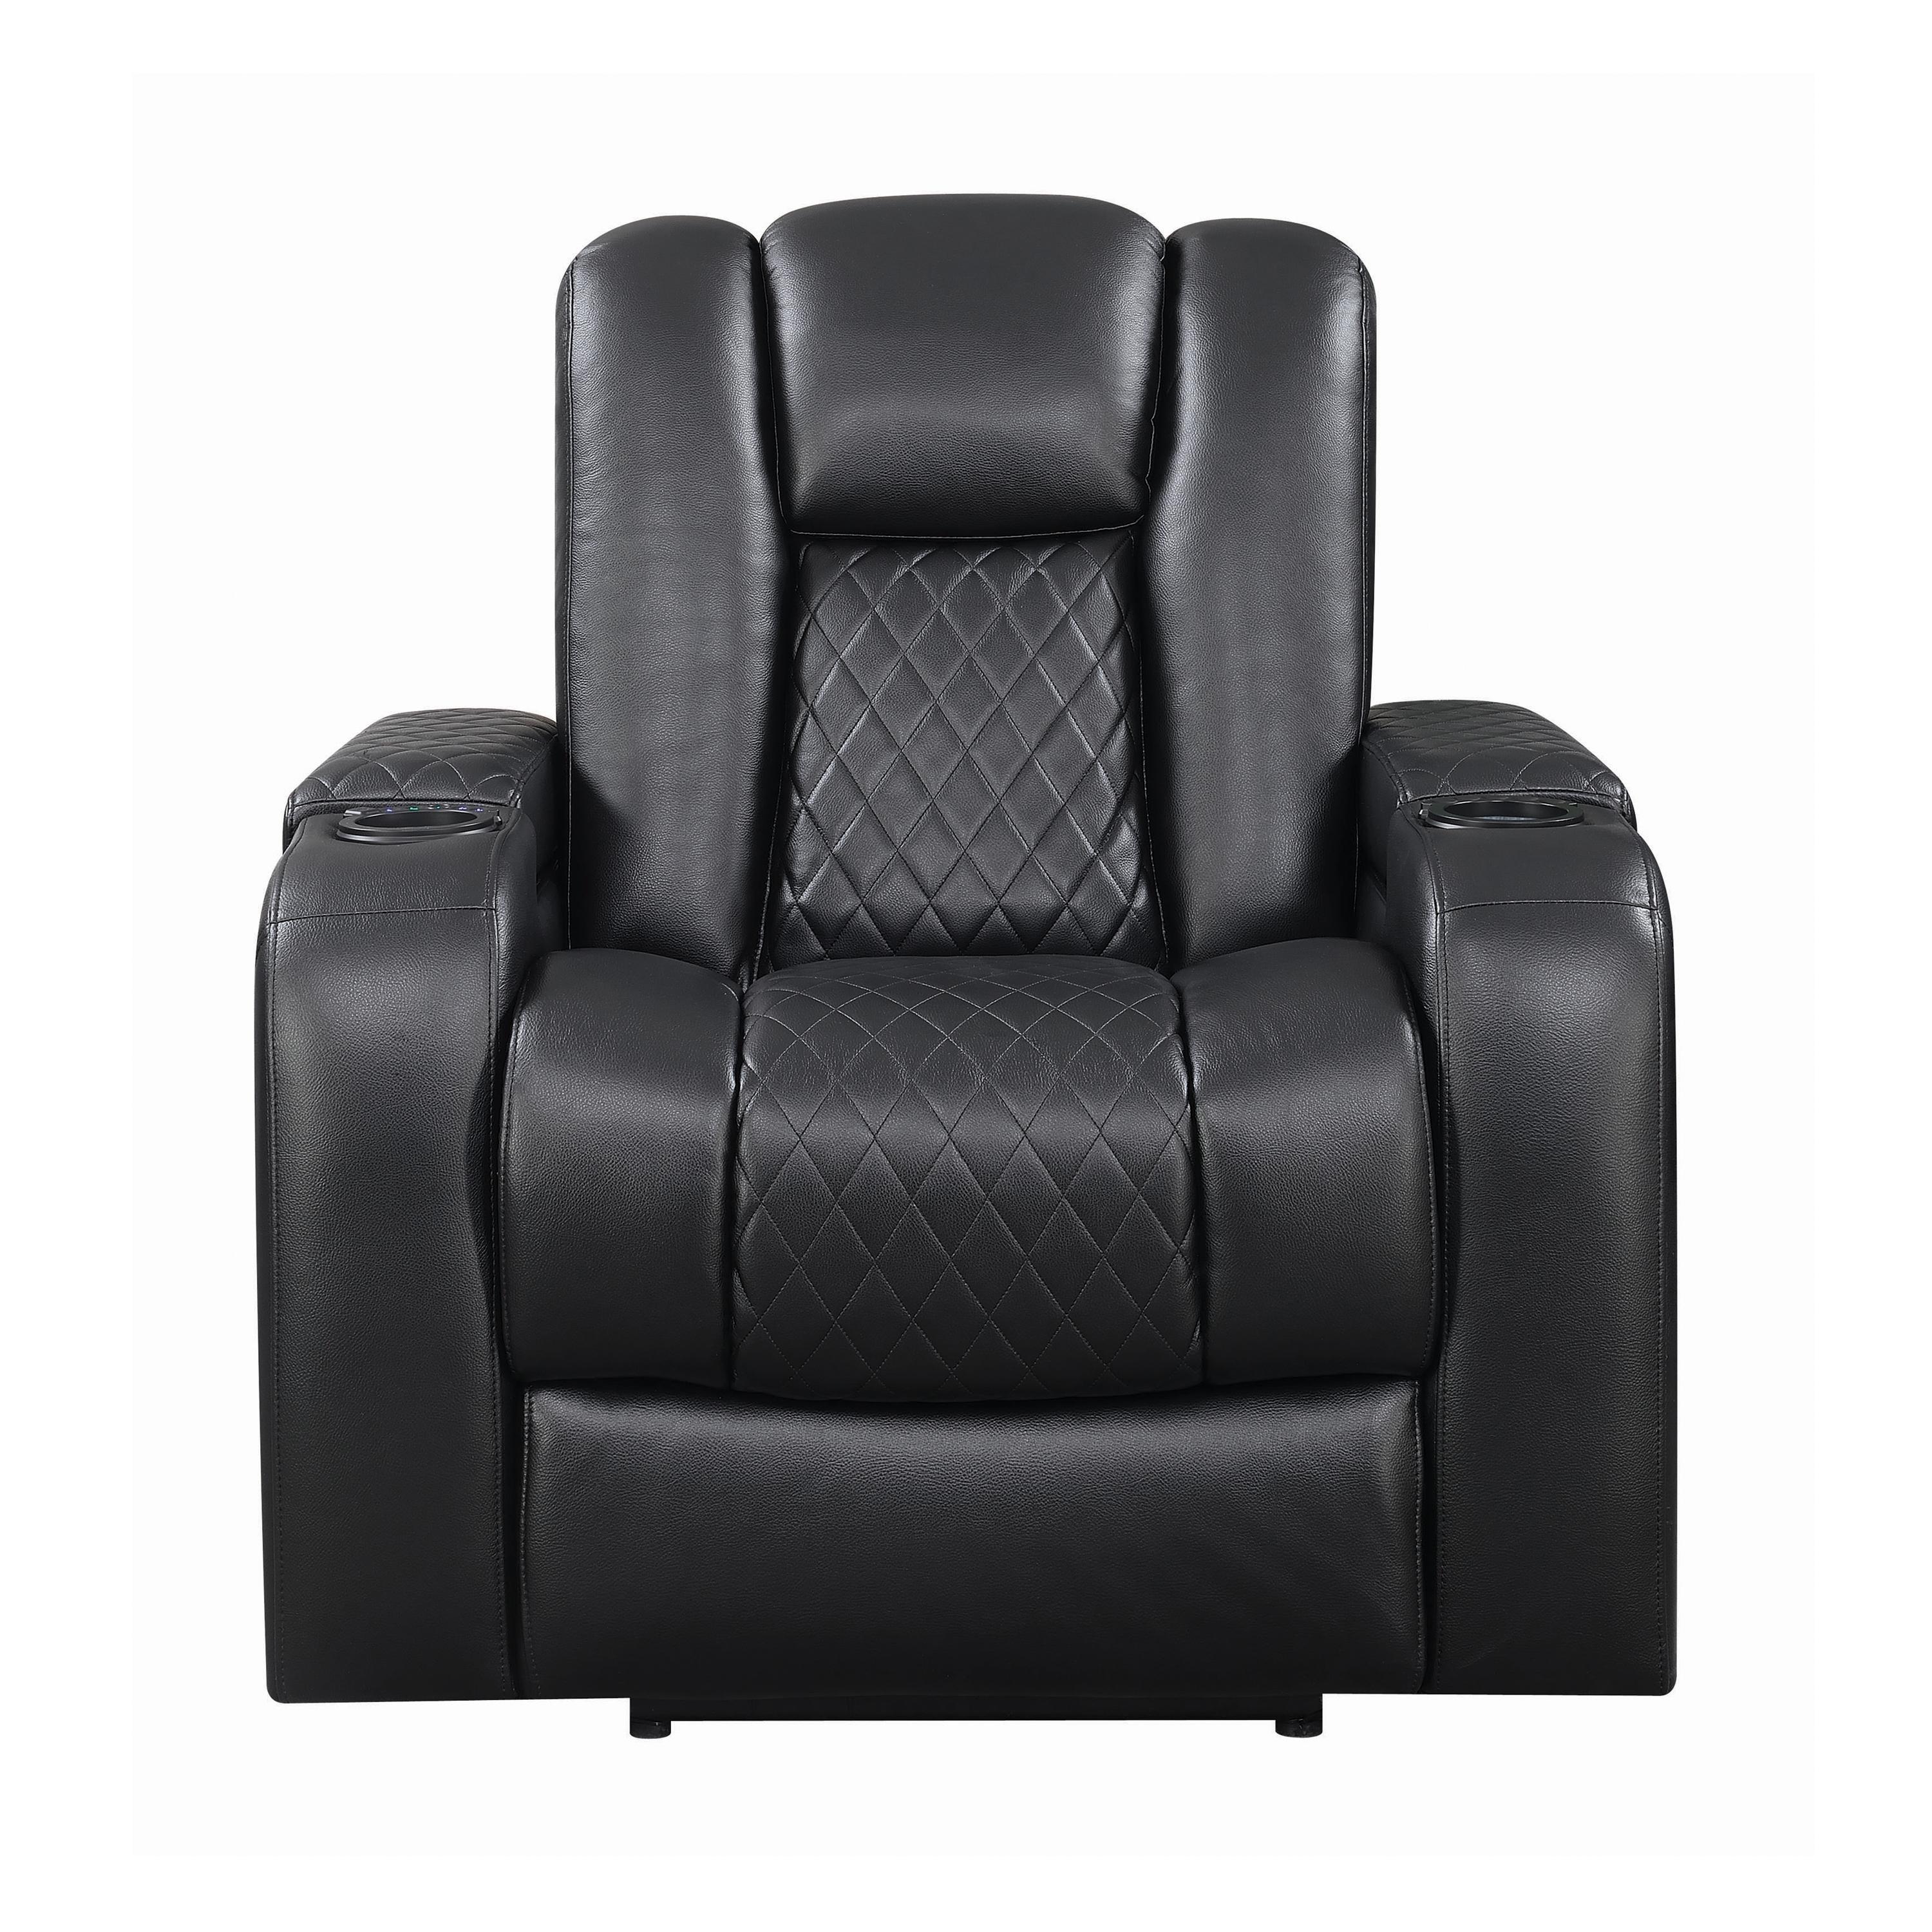 Contemporary Power recliner 602303P Delangelo 602303P in Black Faux Leather